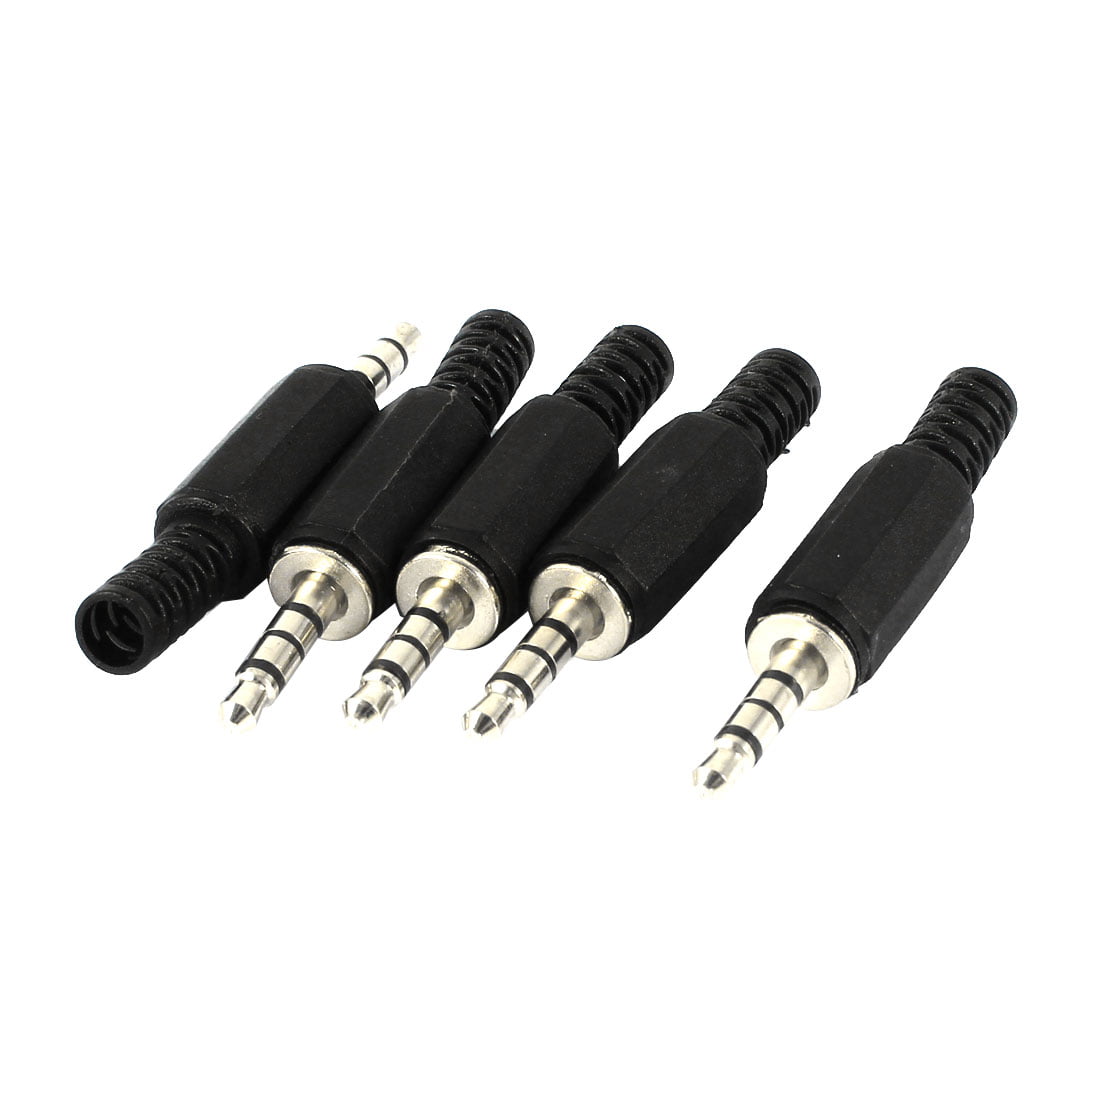 5pcs 3.5mm Stereo Audio Male Plug Jack Adapter Audio Connector Booted Headphone